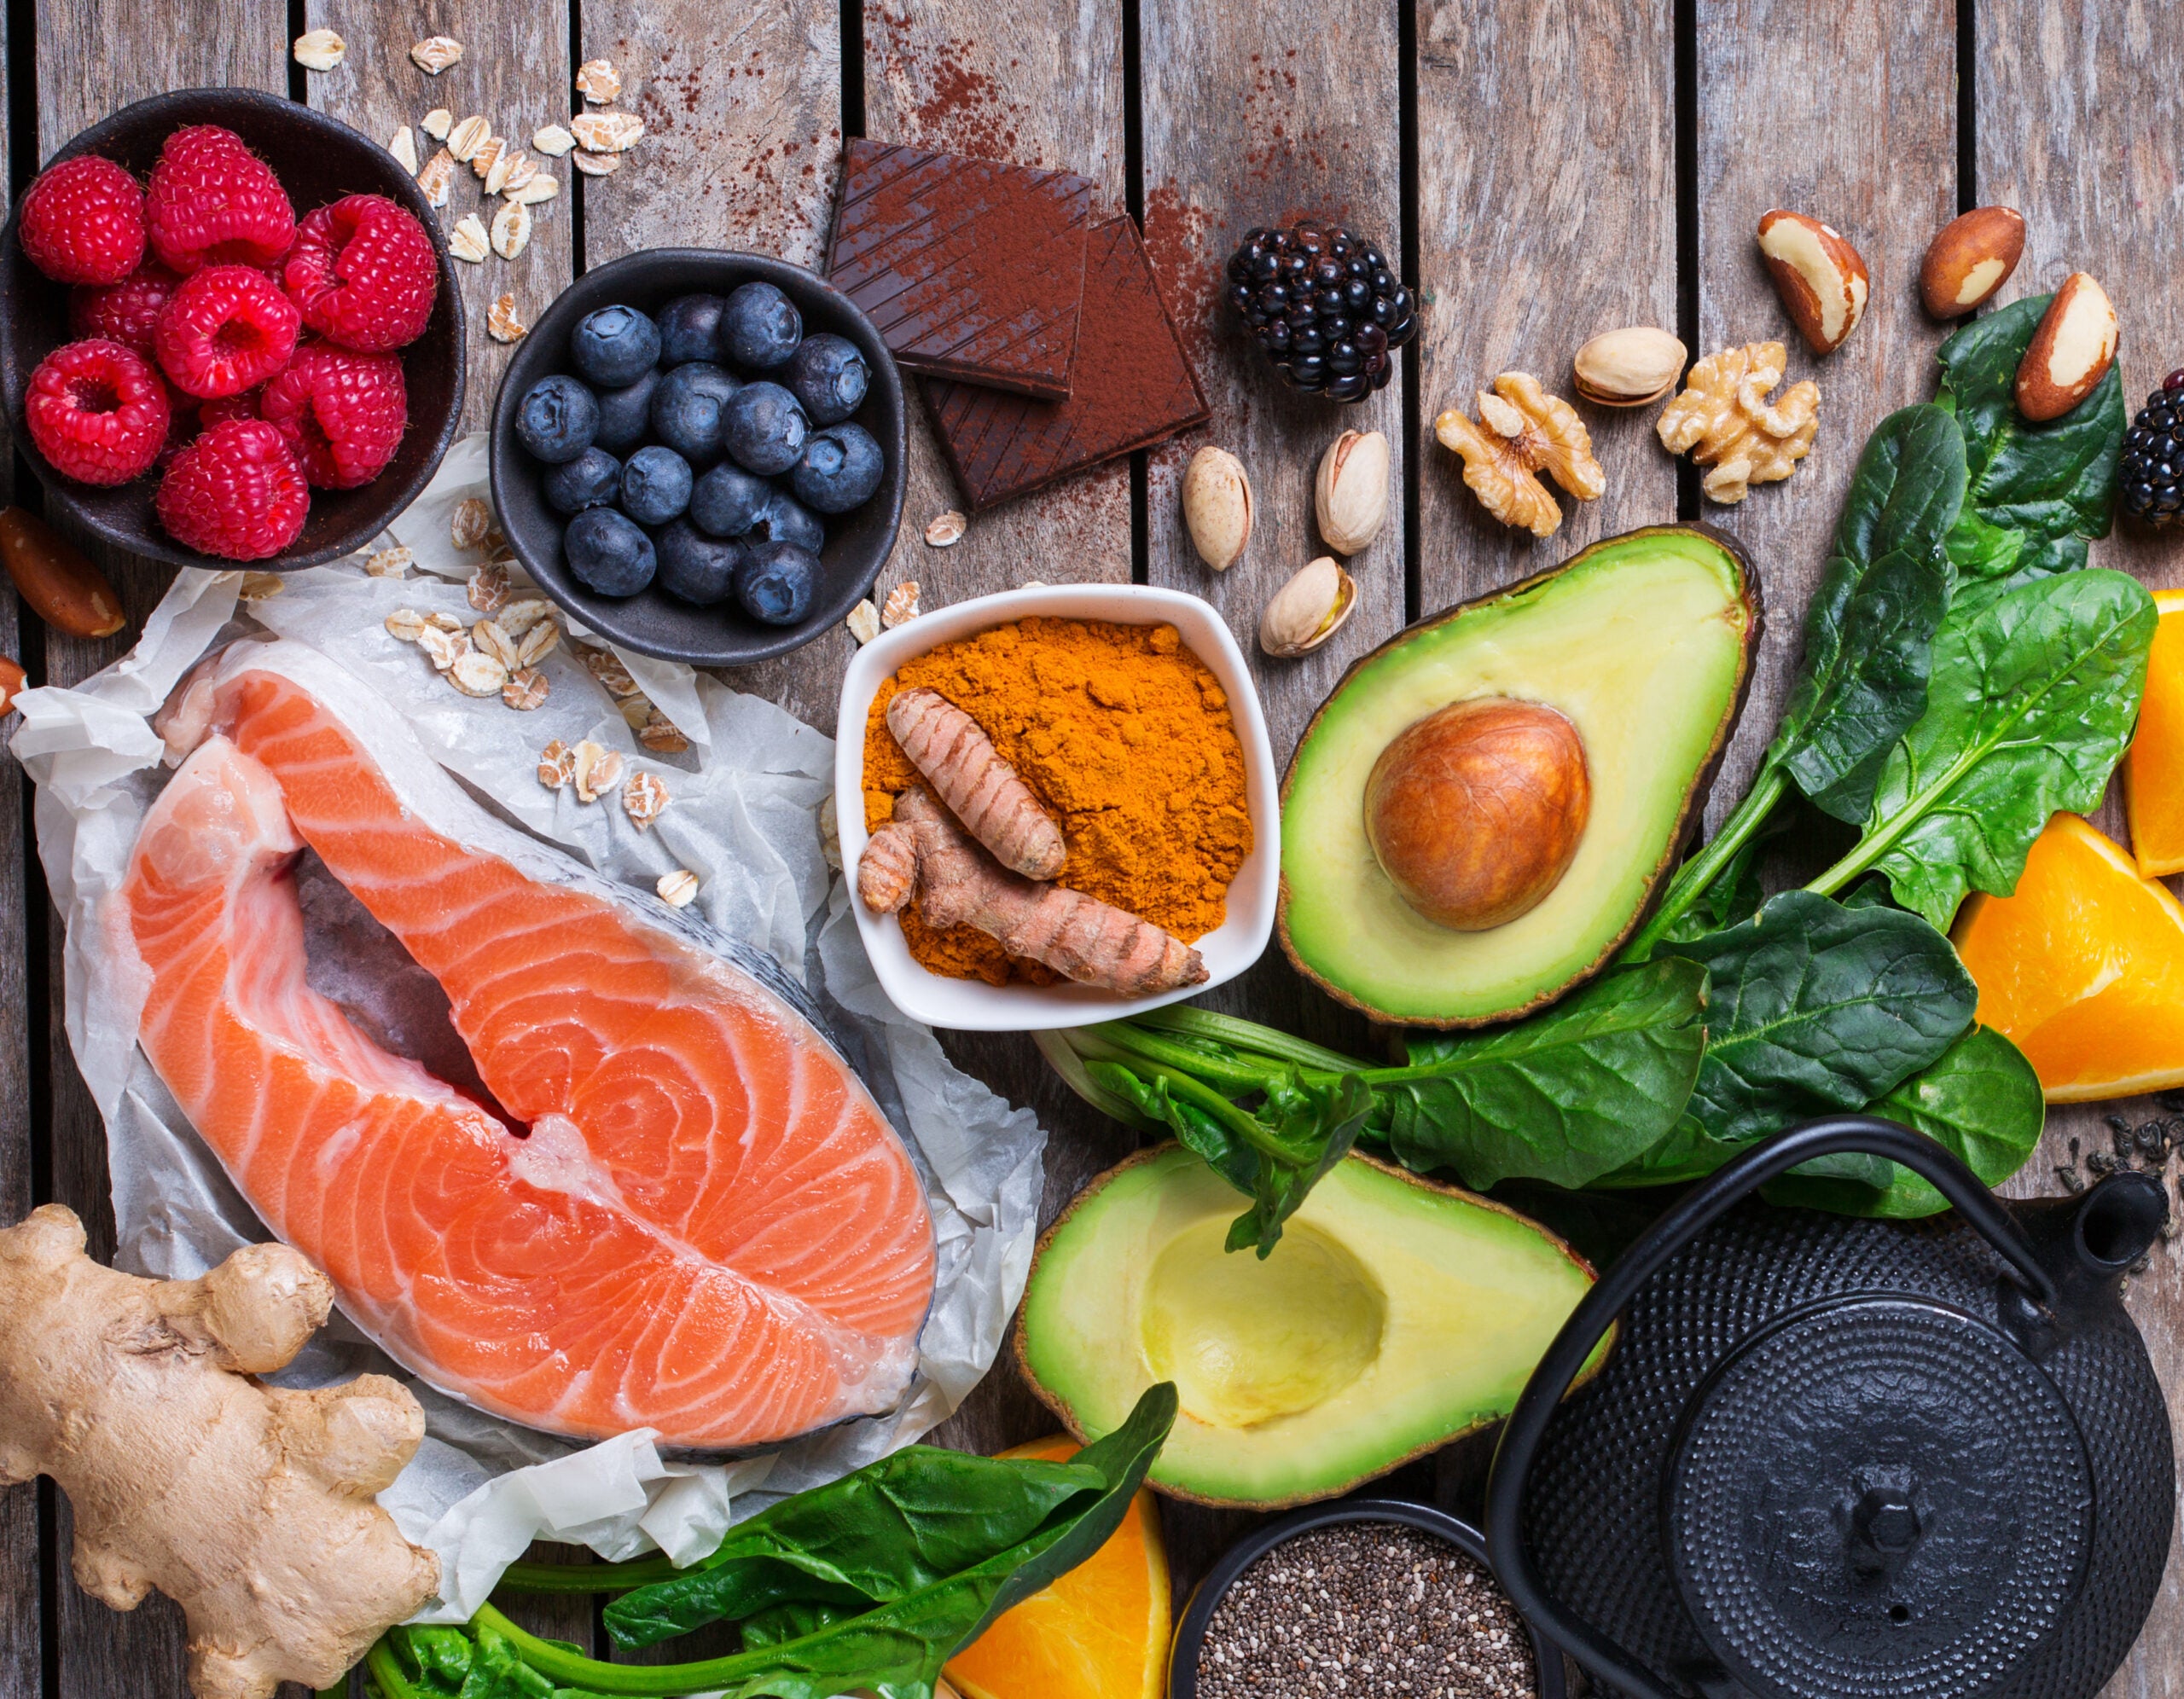 A variety of anti-inflammatory foods including salmon, avocado, turmeric, ginger, dark chocolate, raspberries, blueberries, nuts, seeds, and vegetables, and tea